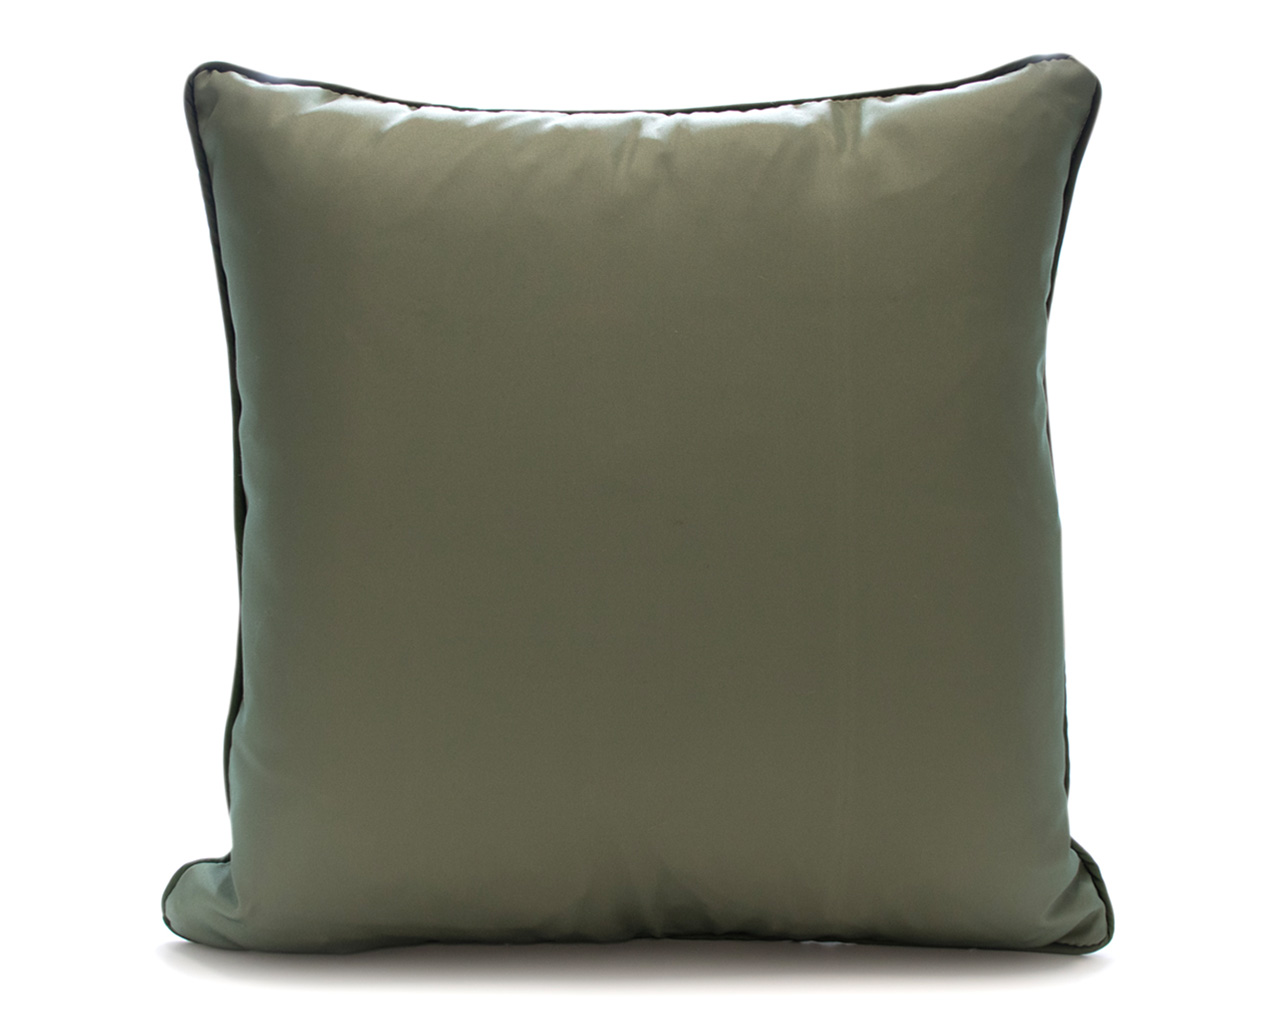 Madras Link Congolian Moss Green Outdoor Cushion - 50x50cm, , hi-res image number null